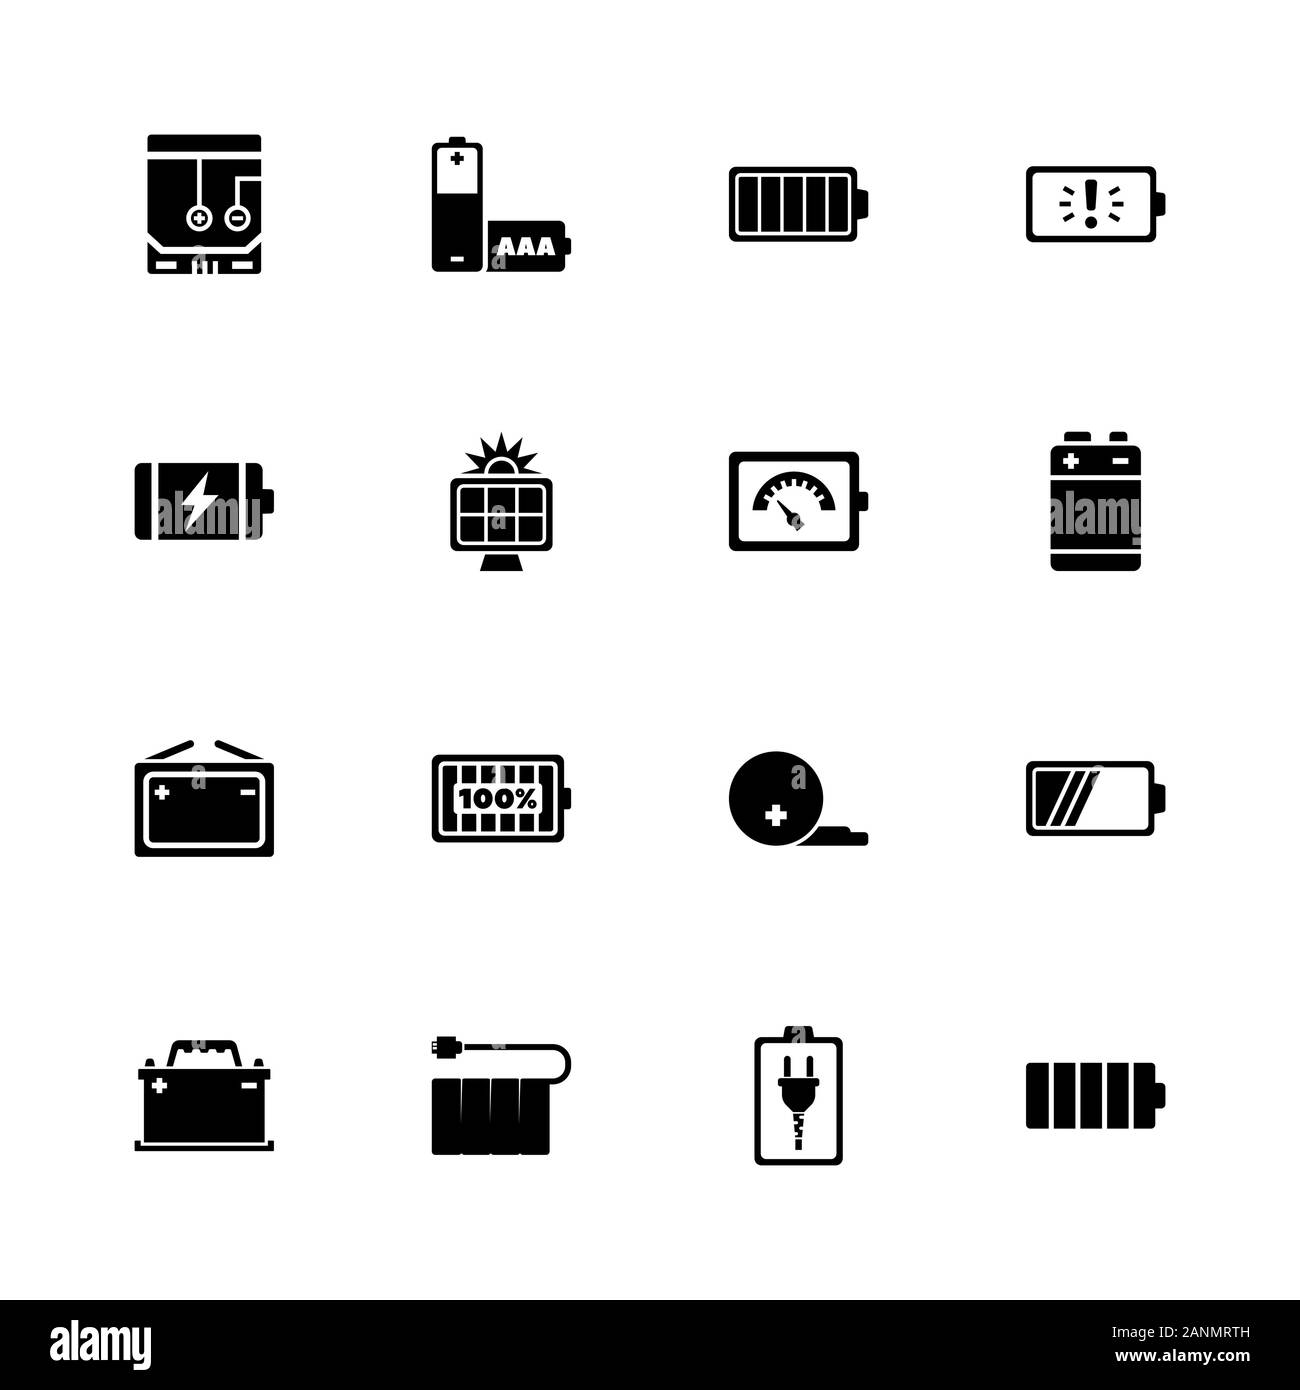 Battery icons - Expand to any size - Change to any colour. Flat Vector Icons - Black Illustration on White Background. Stock Vector